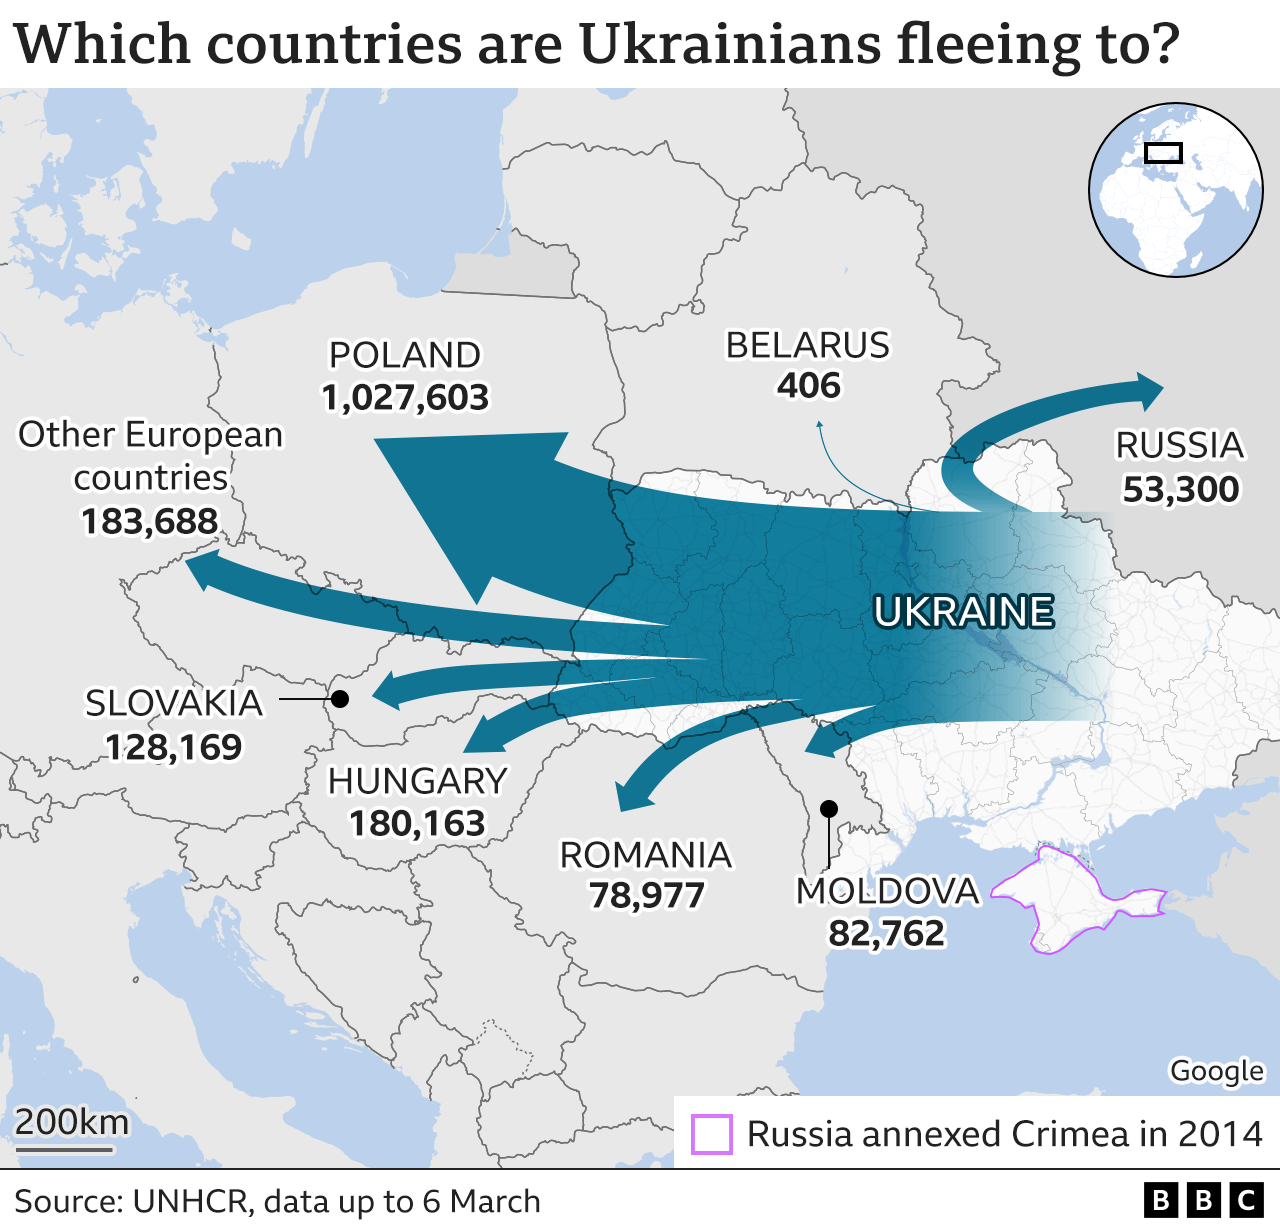 Map showing which countries Ukrainian refugees are fleeing. updated 7 March.